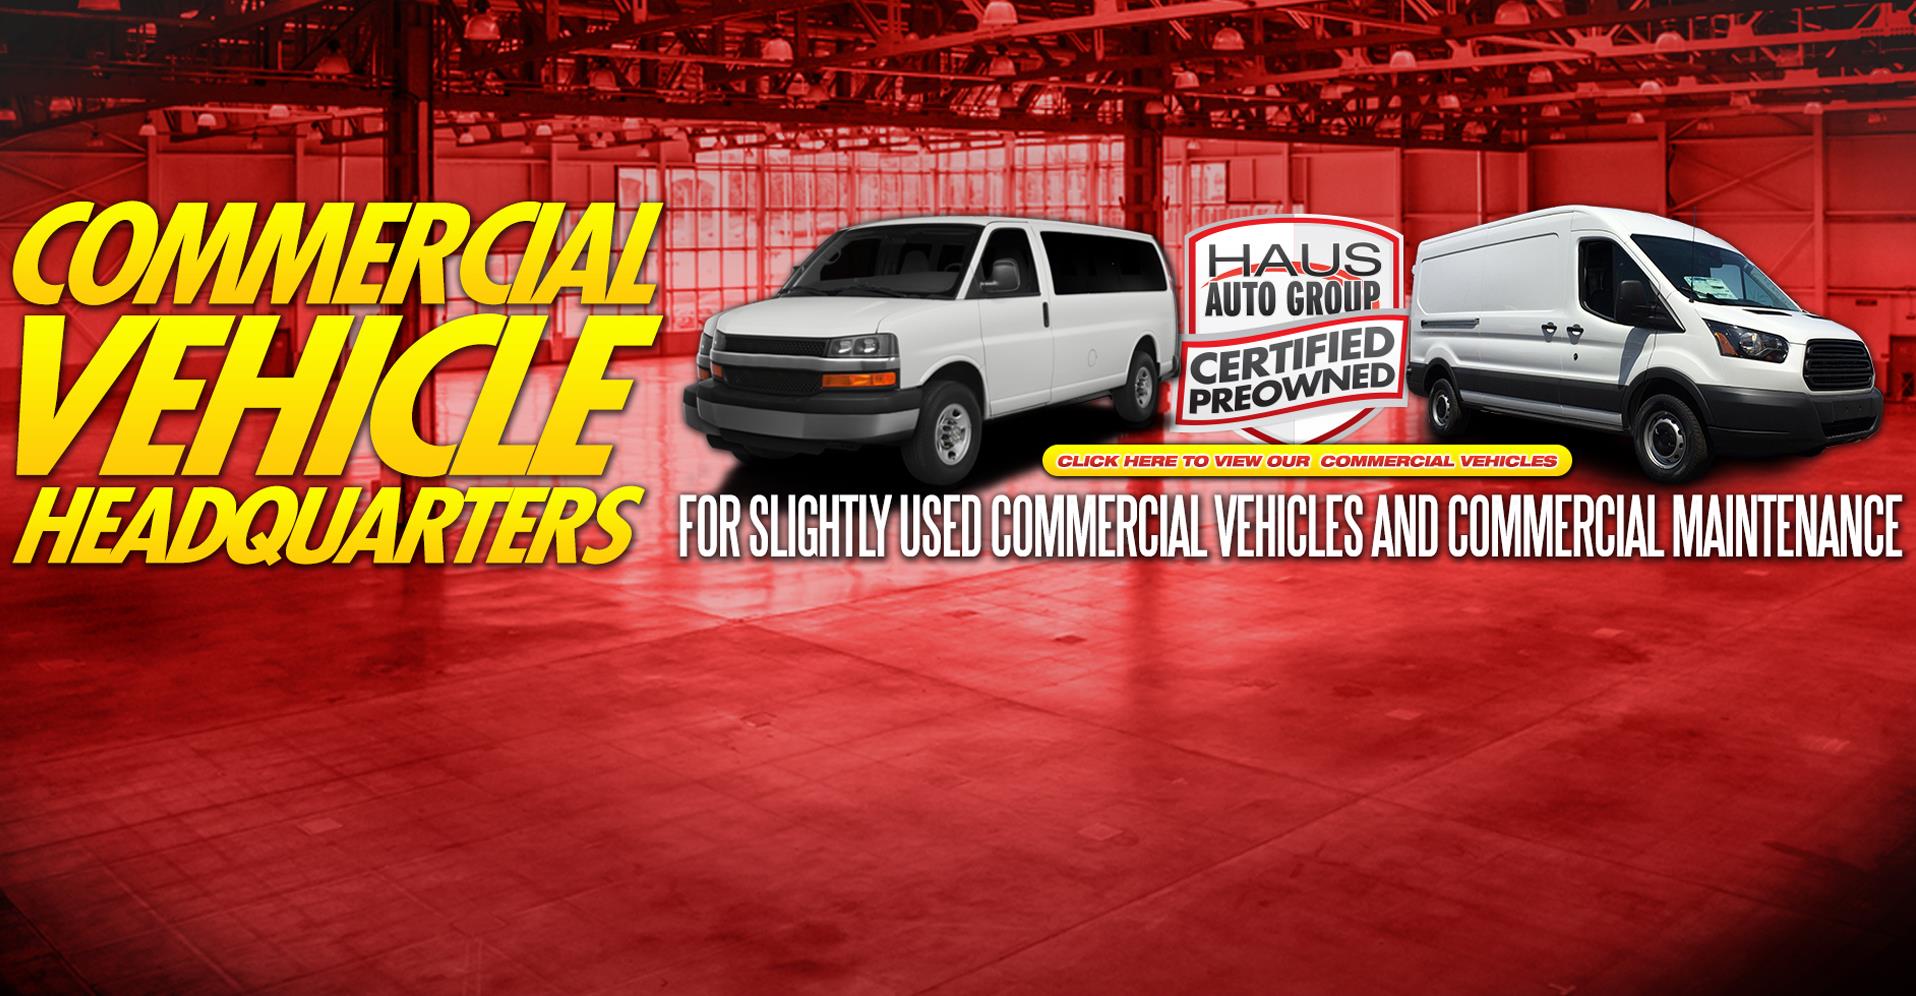 Haus Auto Group Canfield OH | Used Cars Trucks SUVS Sales ...